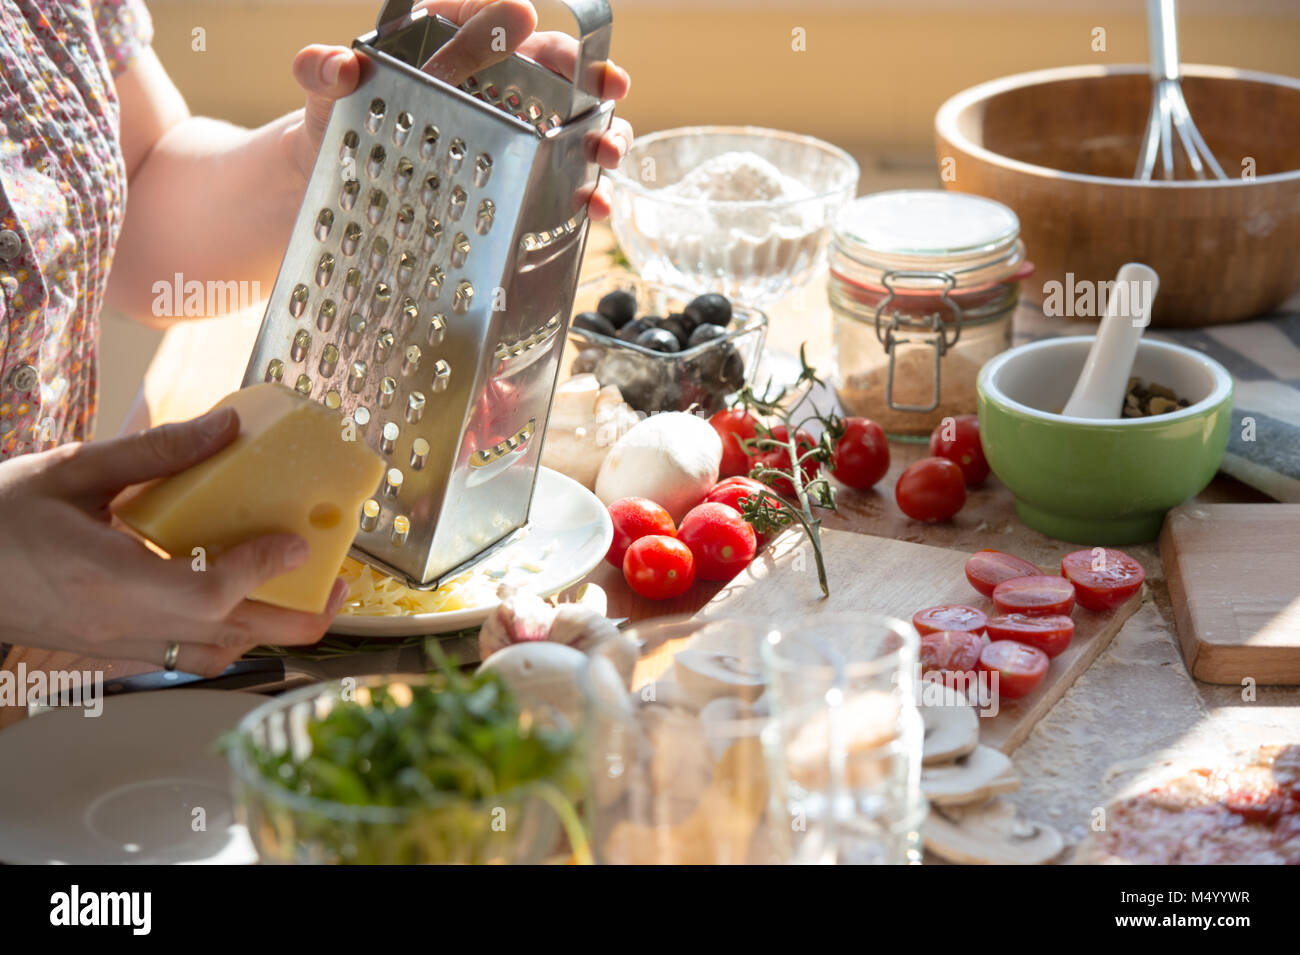 https://c8.alamy.com/comp/M4YYWR/woman-cooking-pizza-at-home-unrecognizable-woman-grating-cheese-M4YYWR.jpg